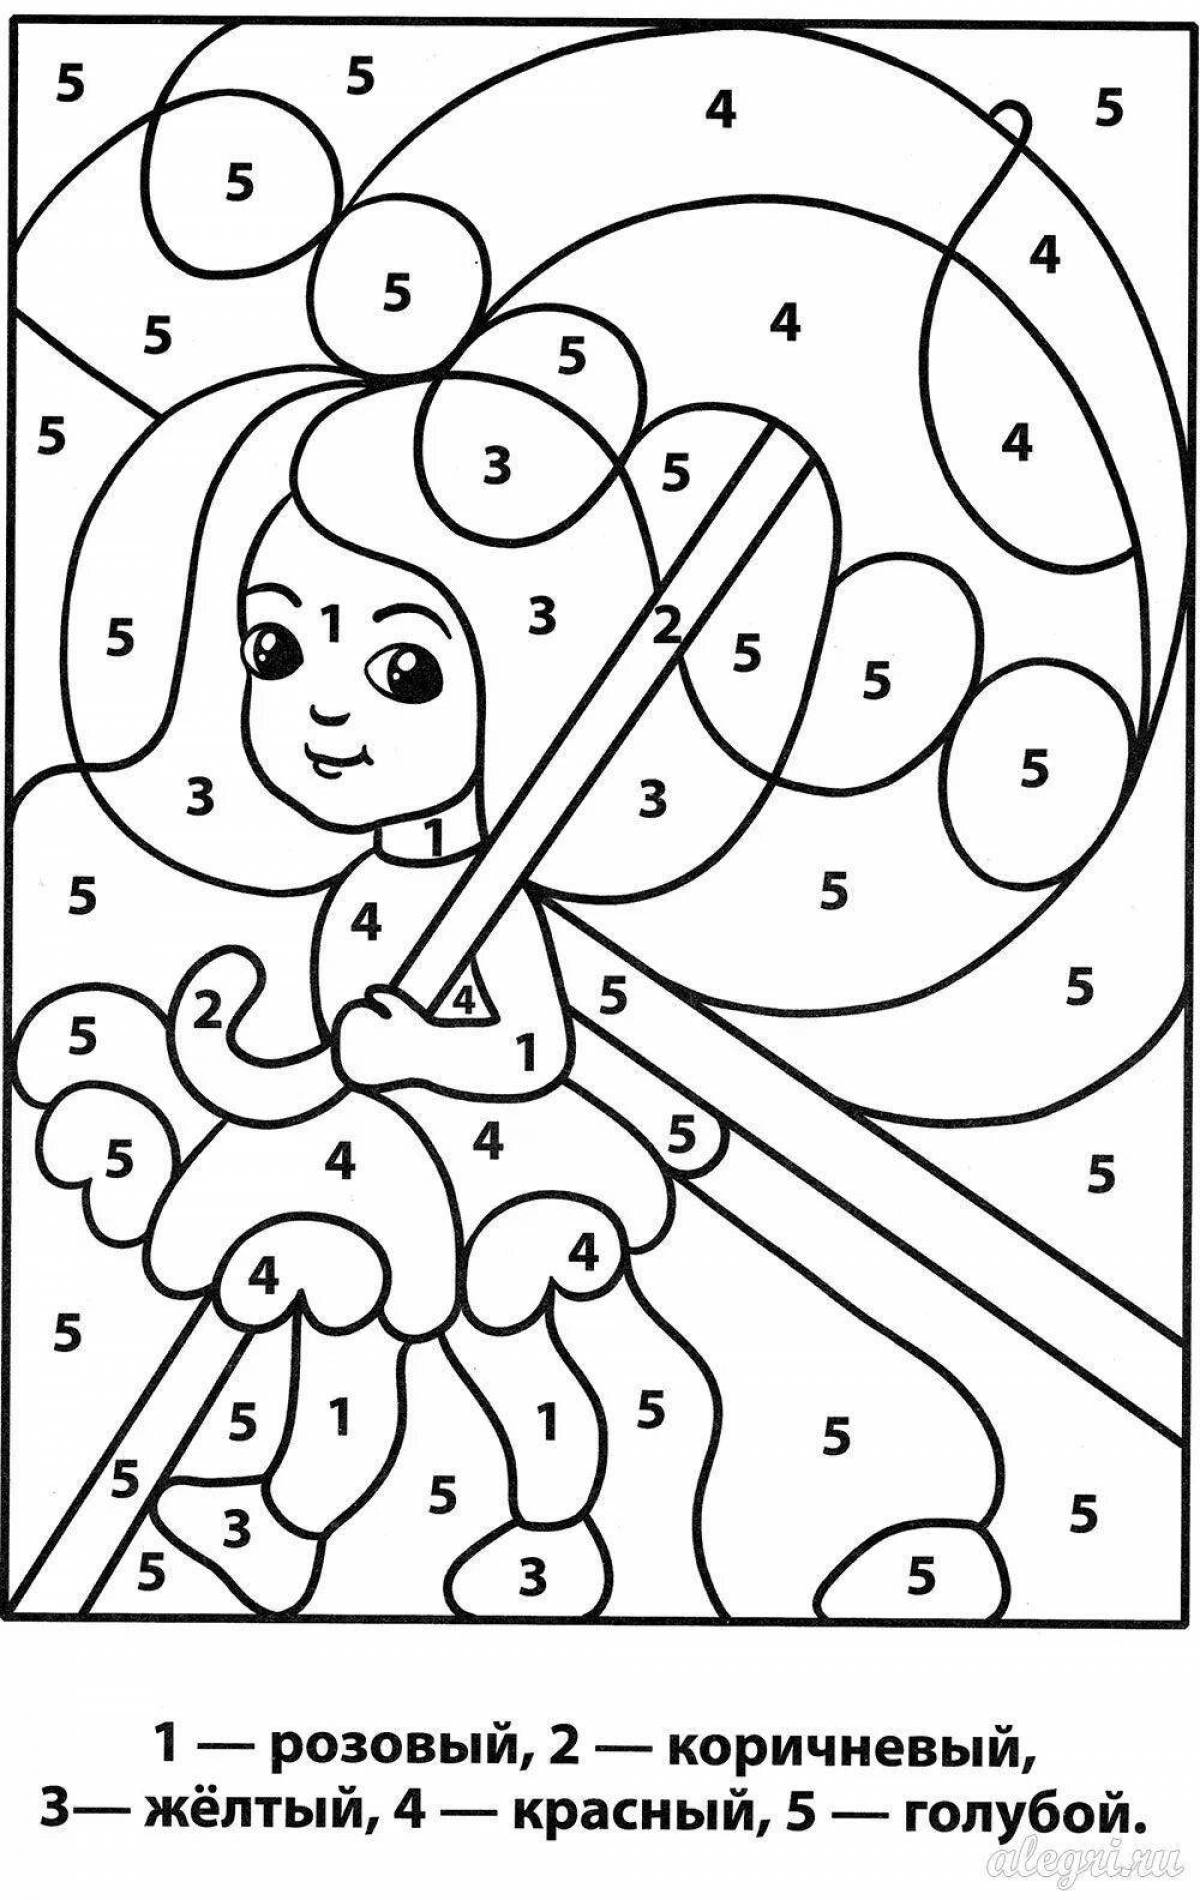 Playful coloring game for girls 4 5